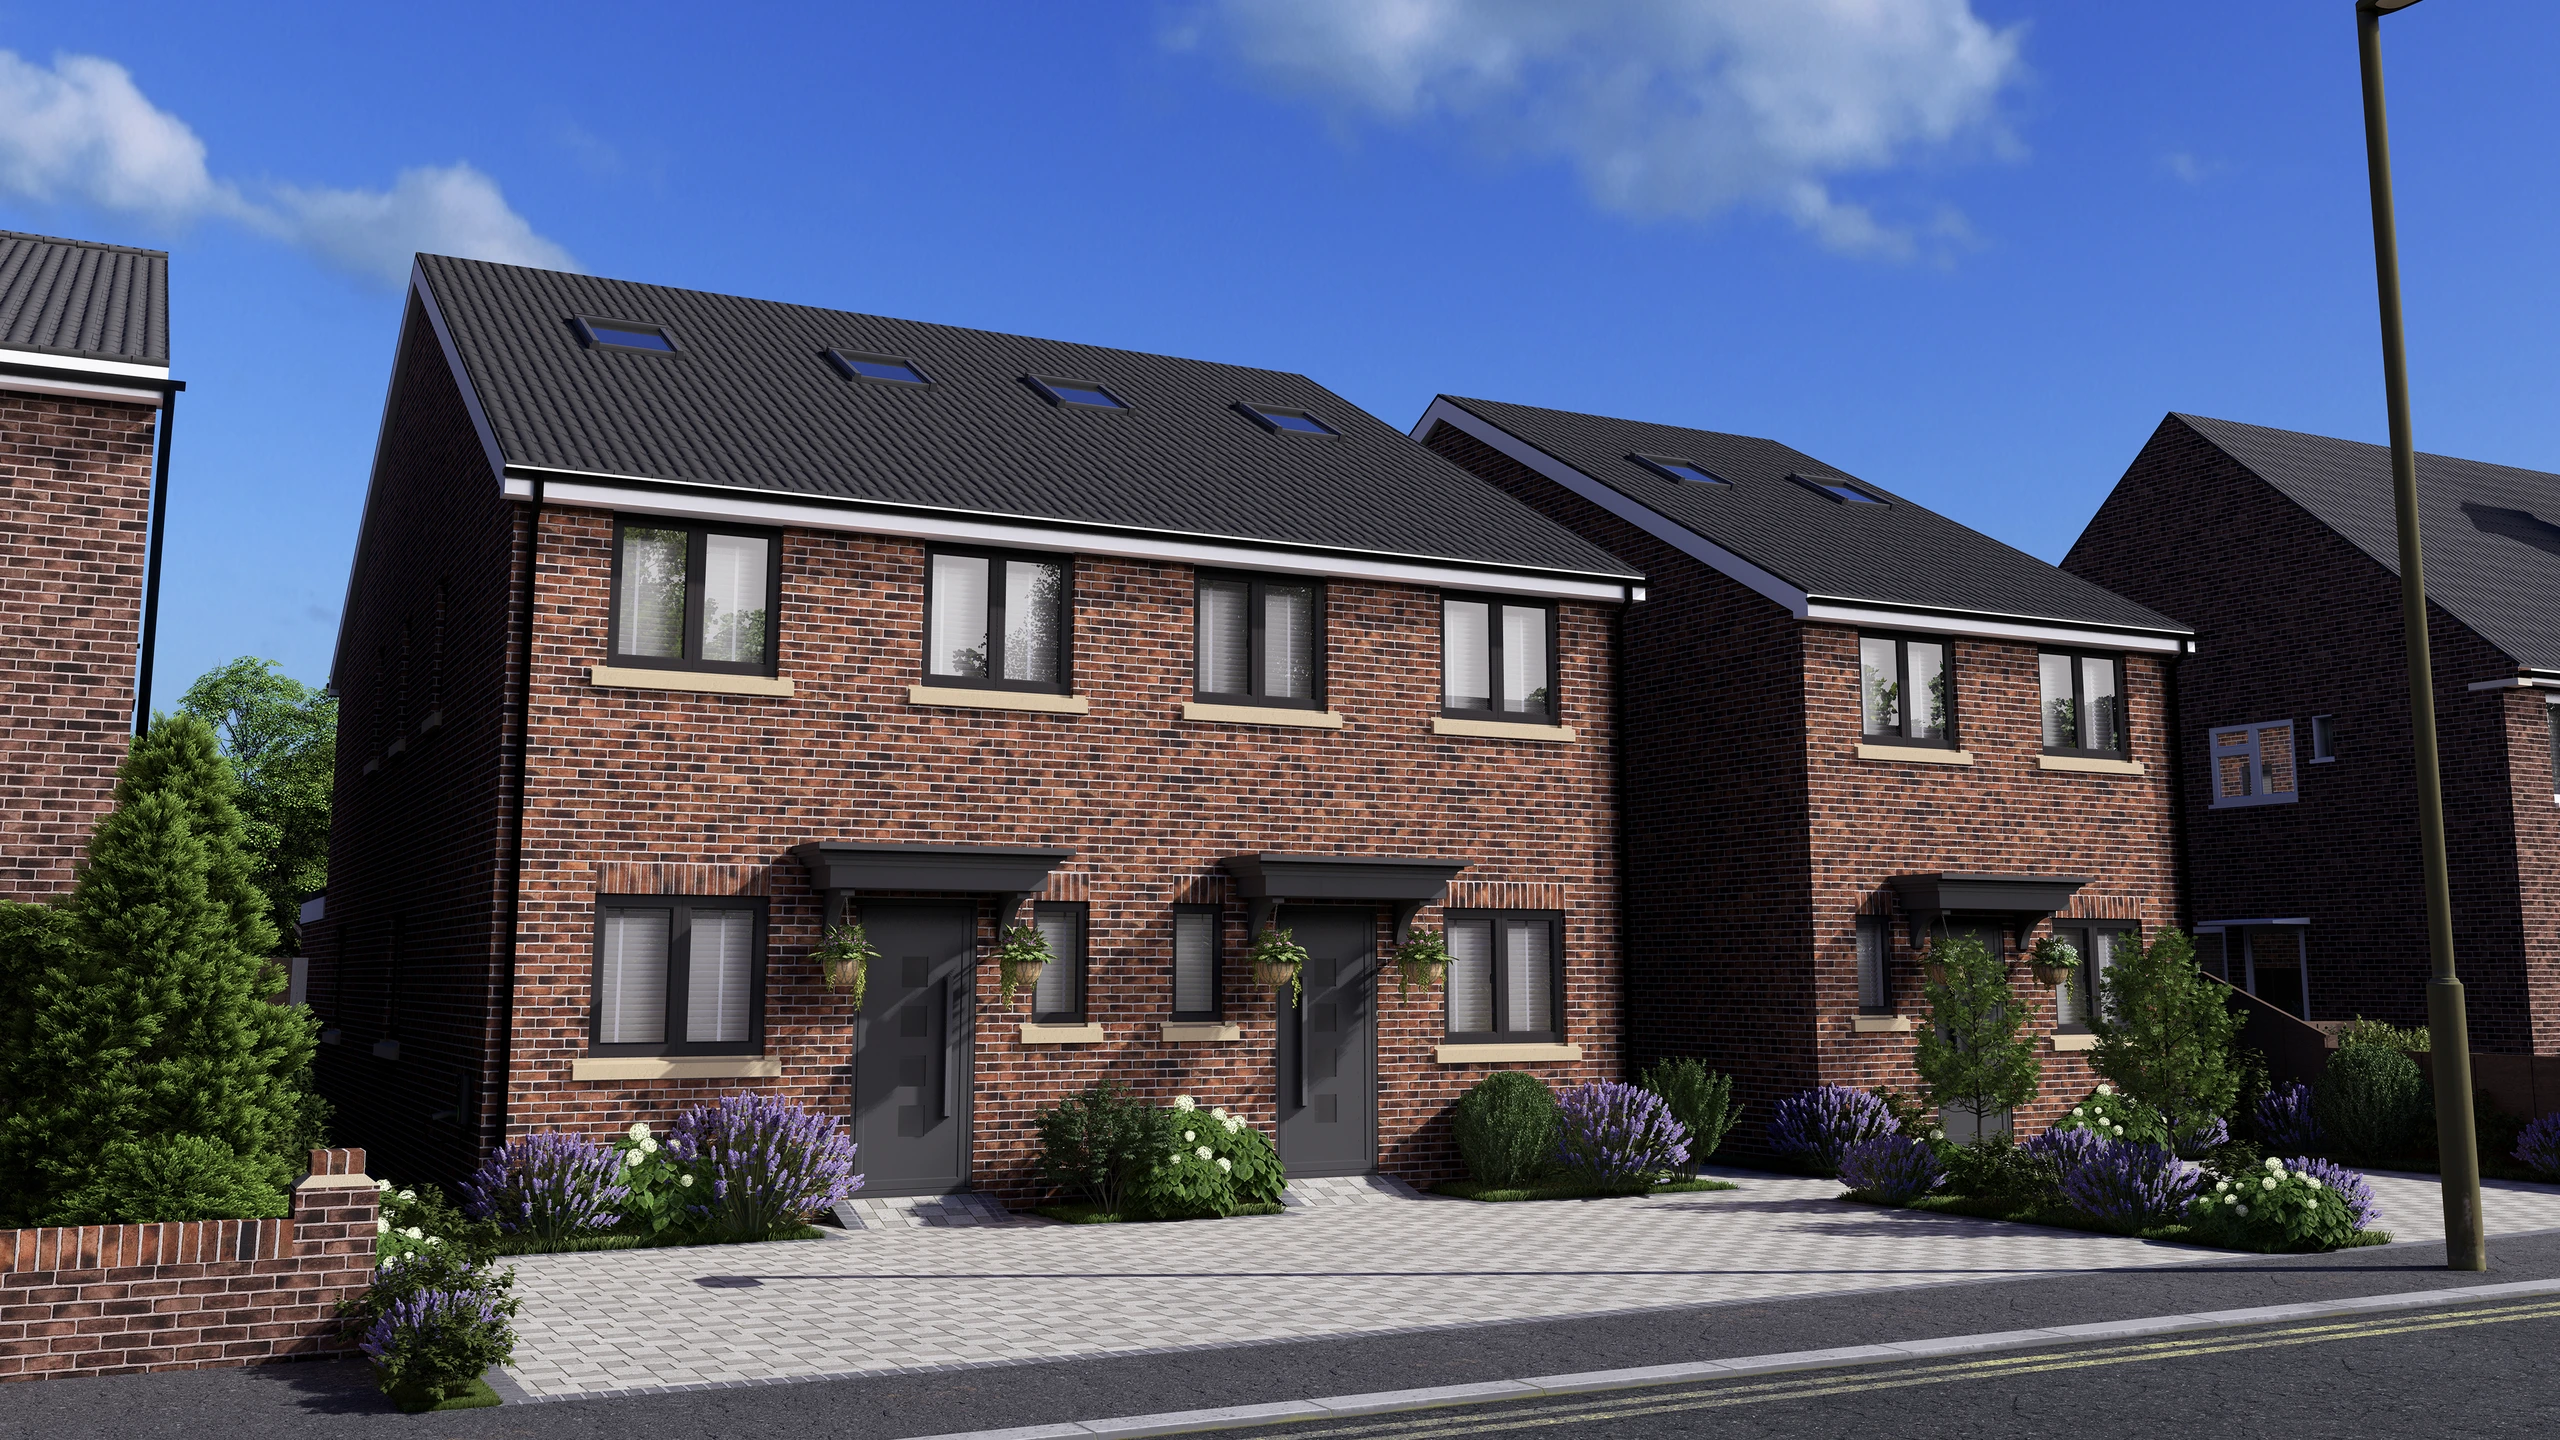 CGI Design of New Build Homes in Red Brick